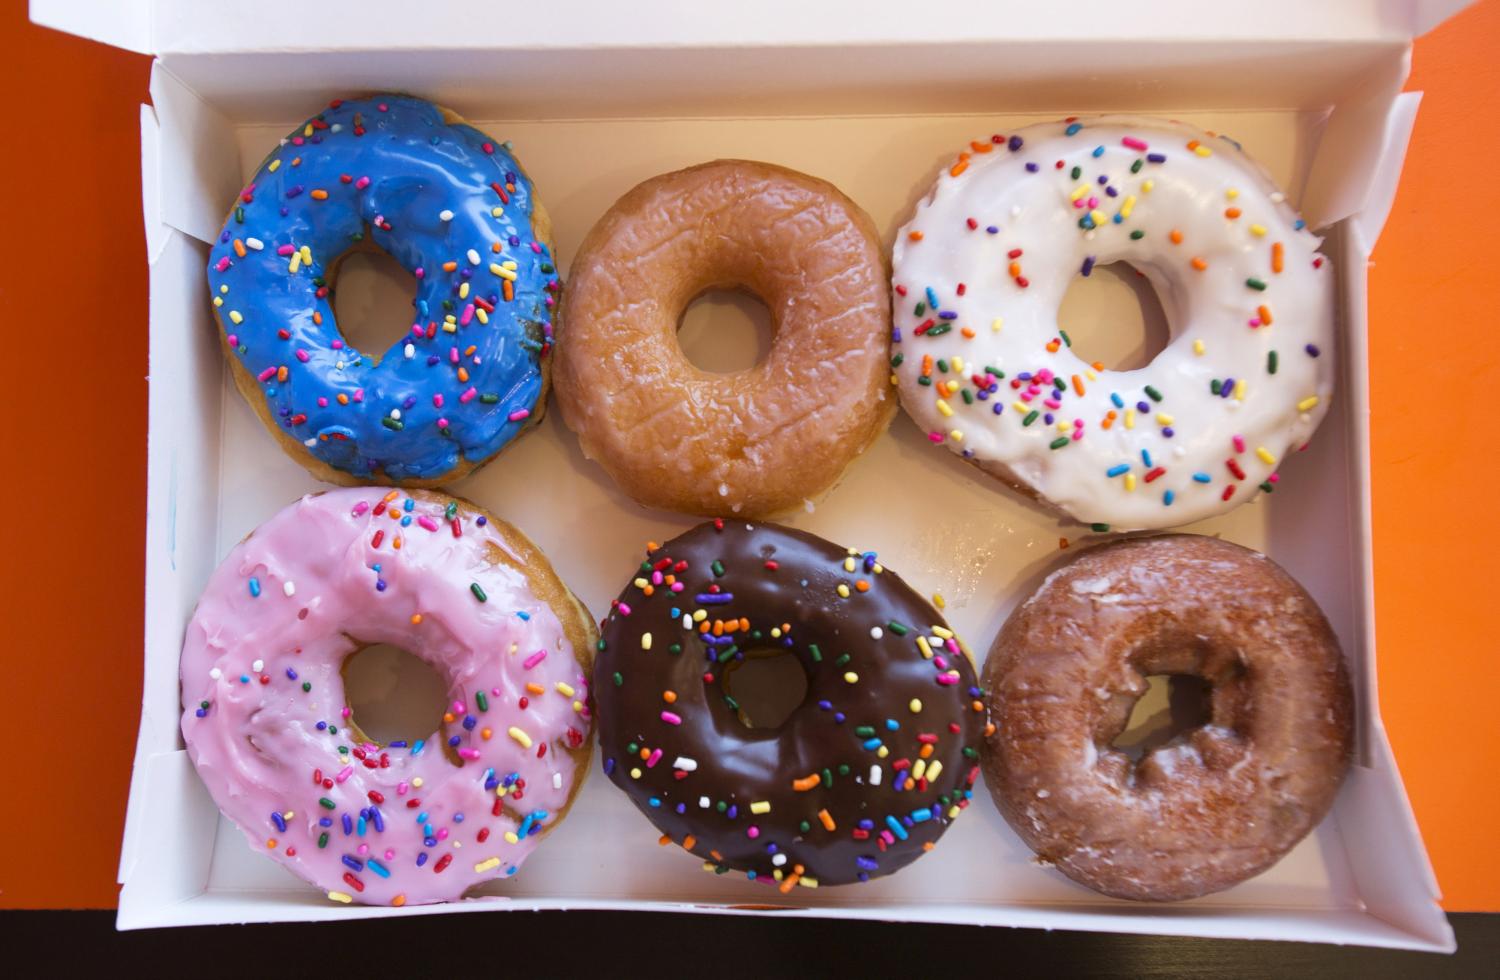 A box of donuts, (from top L clockwise) manager's special, traditional glazed, vanilla, pumpkin, chocolate and strawberry, is pictured at a newly opened Dunkin' Donuts store in Santa Monica, California September 2, 2014.   REUTERS/Mario Anzuoni/File Photo            GLOBAL BUSINESS WEEK AHEAD PACKAGE    SEARCH BUSINESS WEEK AHEAD 17 OCT FOR ALL IMAGES - S1BEUHKTJKAB